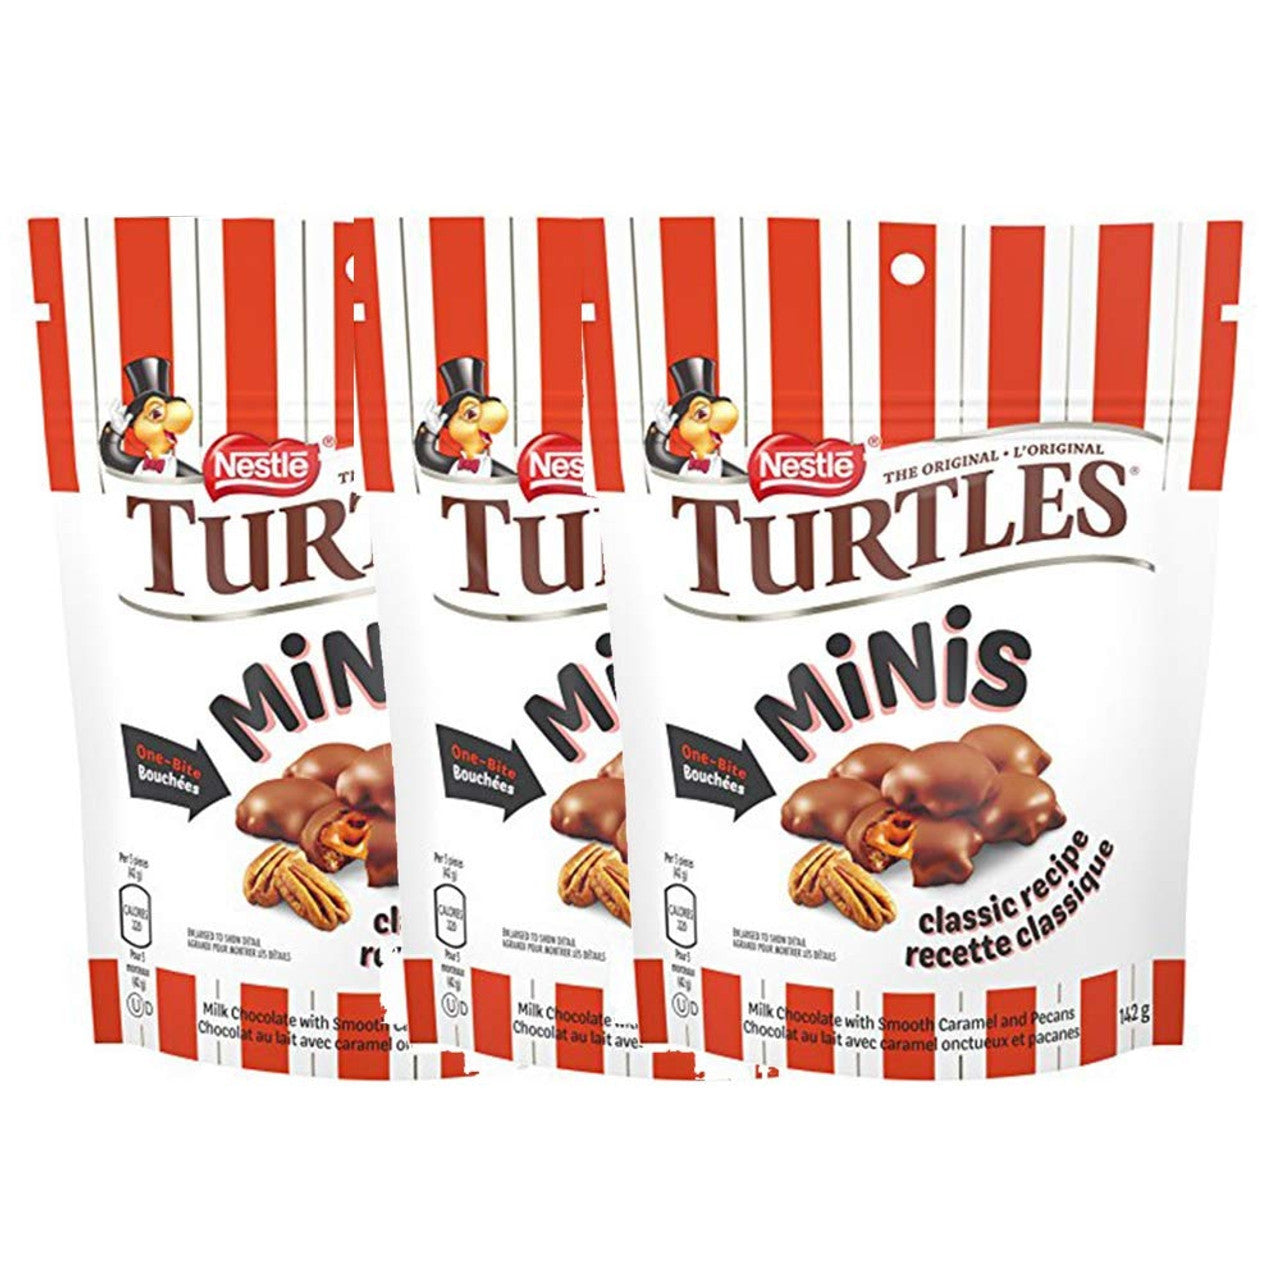 TURTLES Mini Original, Pouch 142g/5 oz., (3 Pack) {Imported from Canada}